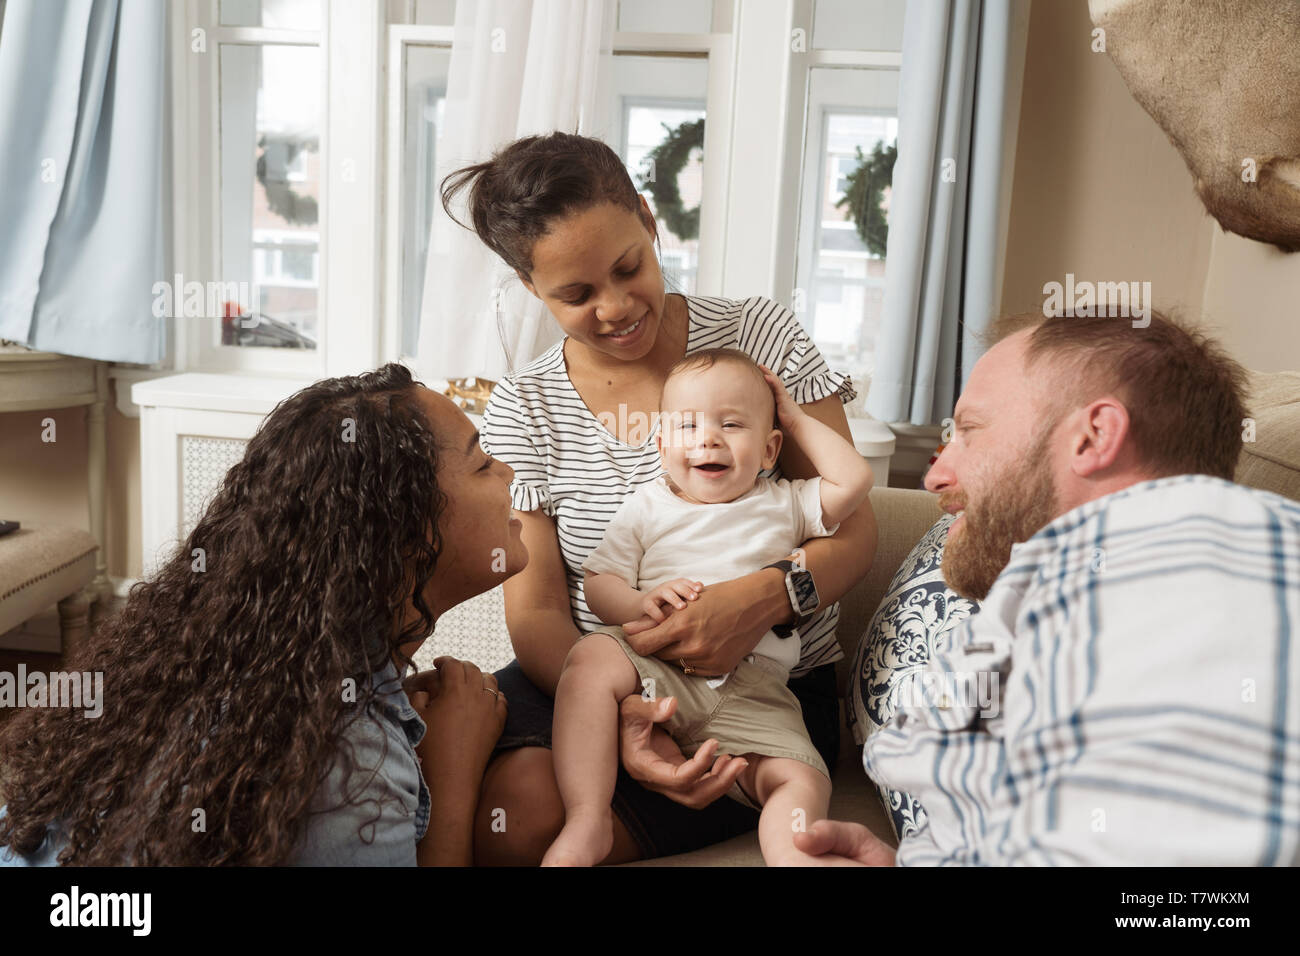 family of  4 in north Philadelphia, 6 month old bby, 15 year old sister. Stock Photo